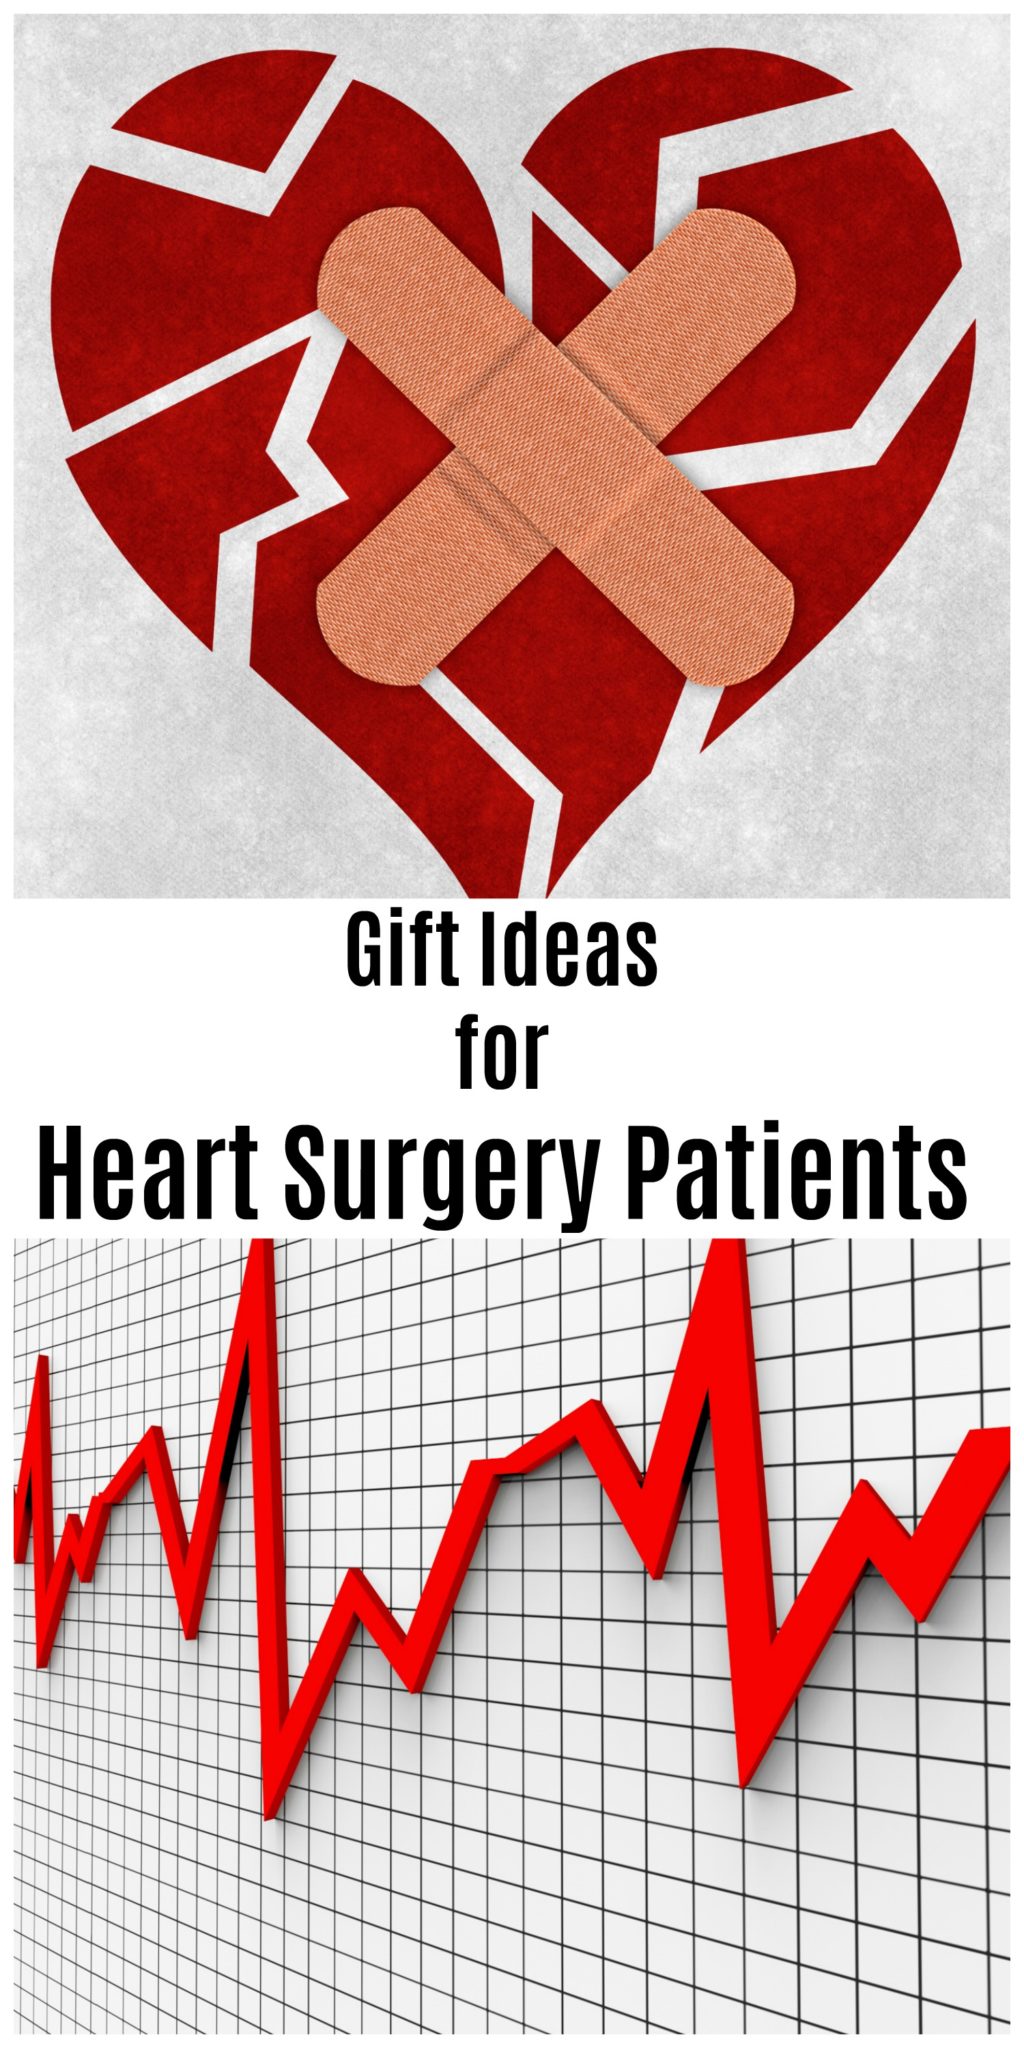 gifts for heart surgery